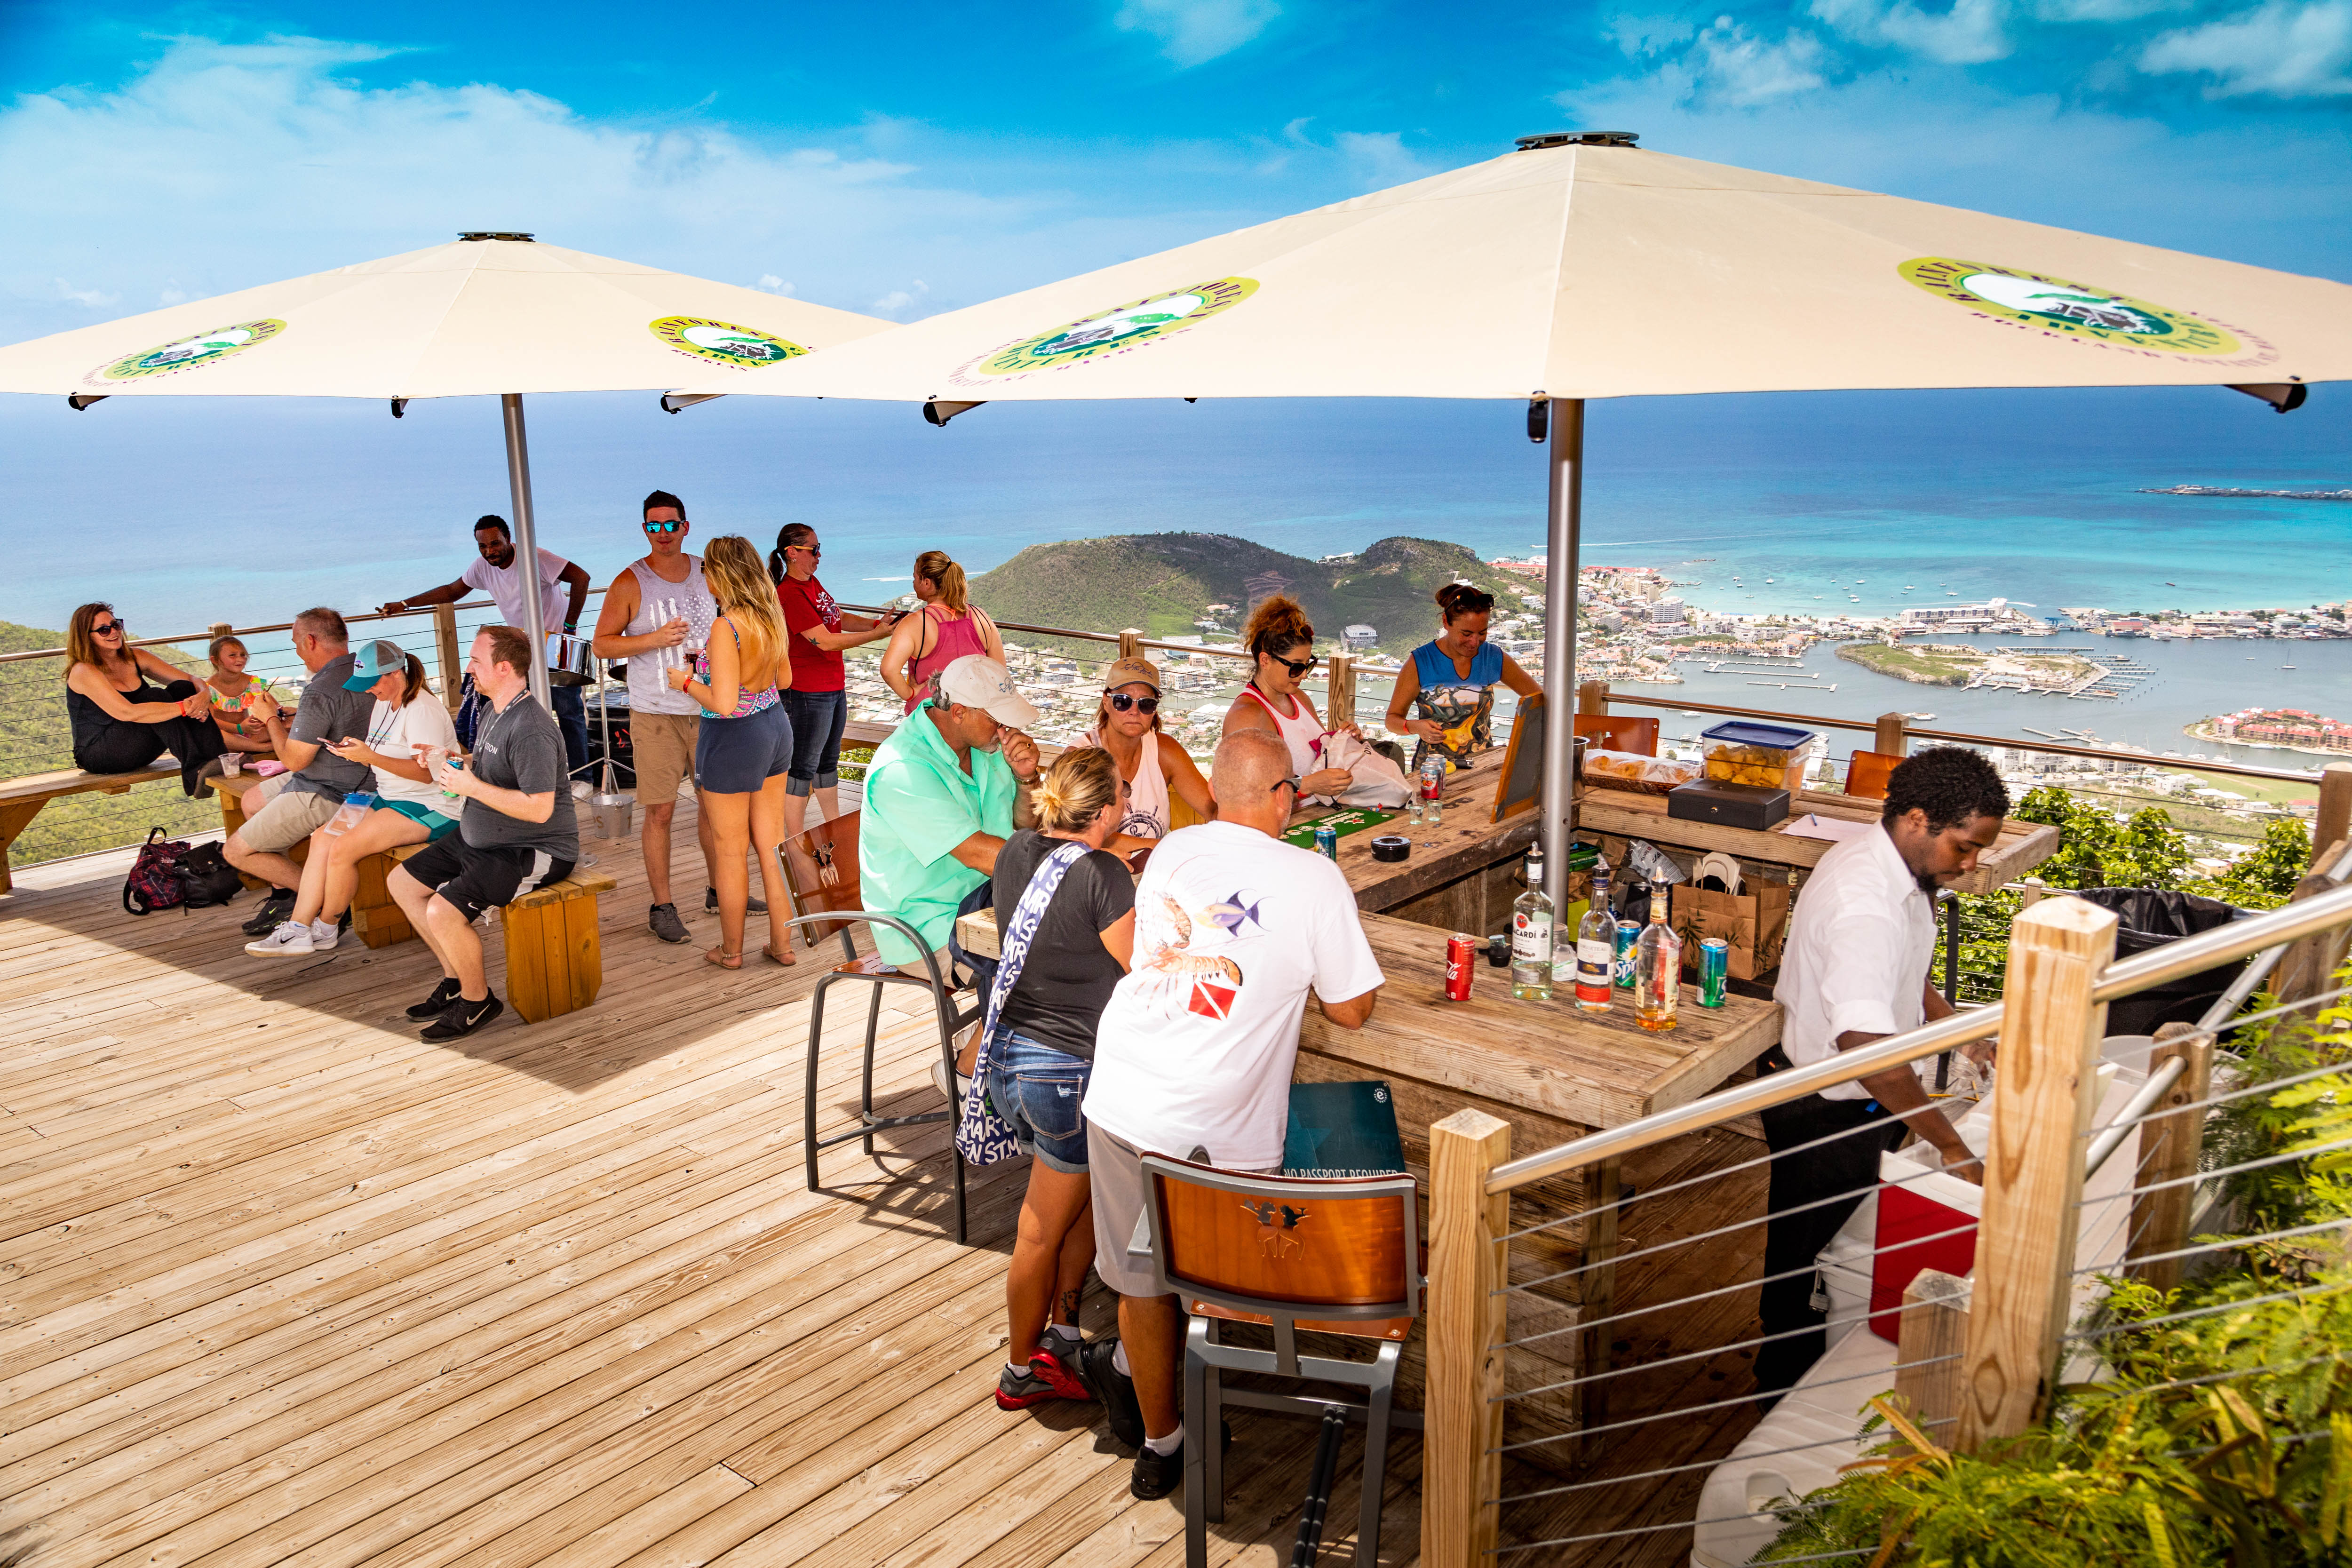 Guests linger for the views at Rainforest Adventures Rockland Estate's hill-top bar in St. Maarten.